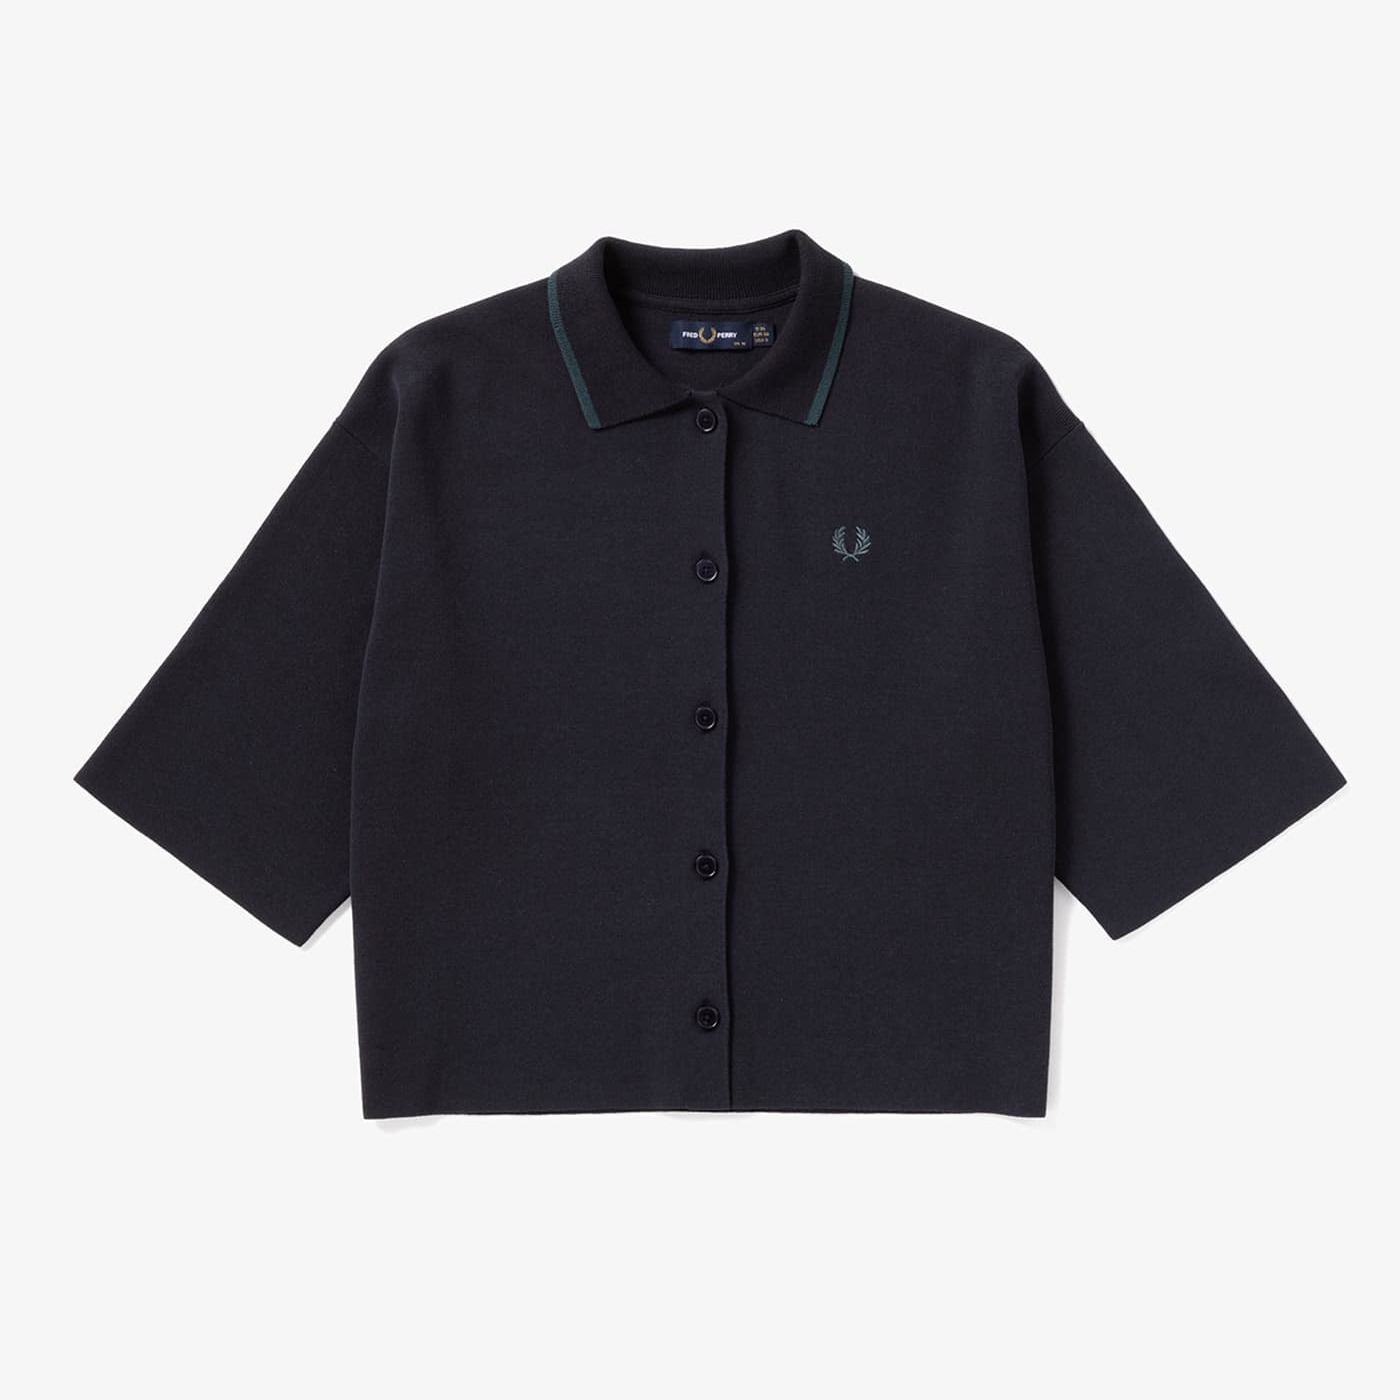 FRED PERRY Short Sleeved Knitted Shirt着丈ショート